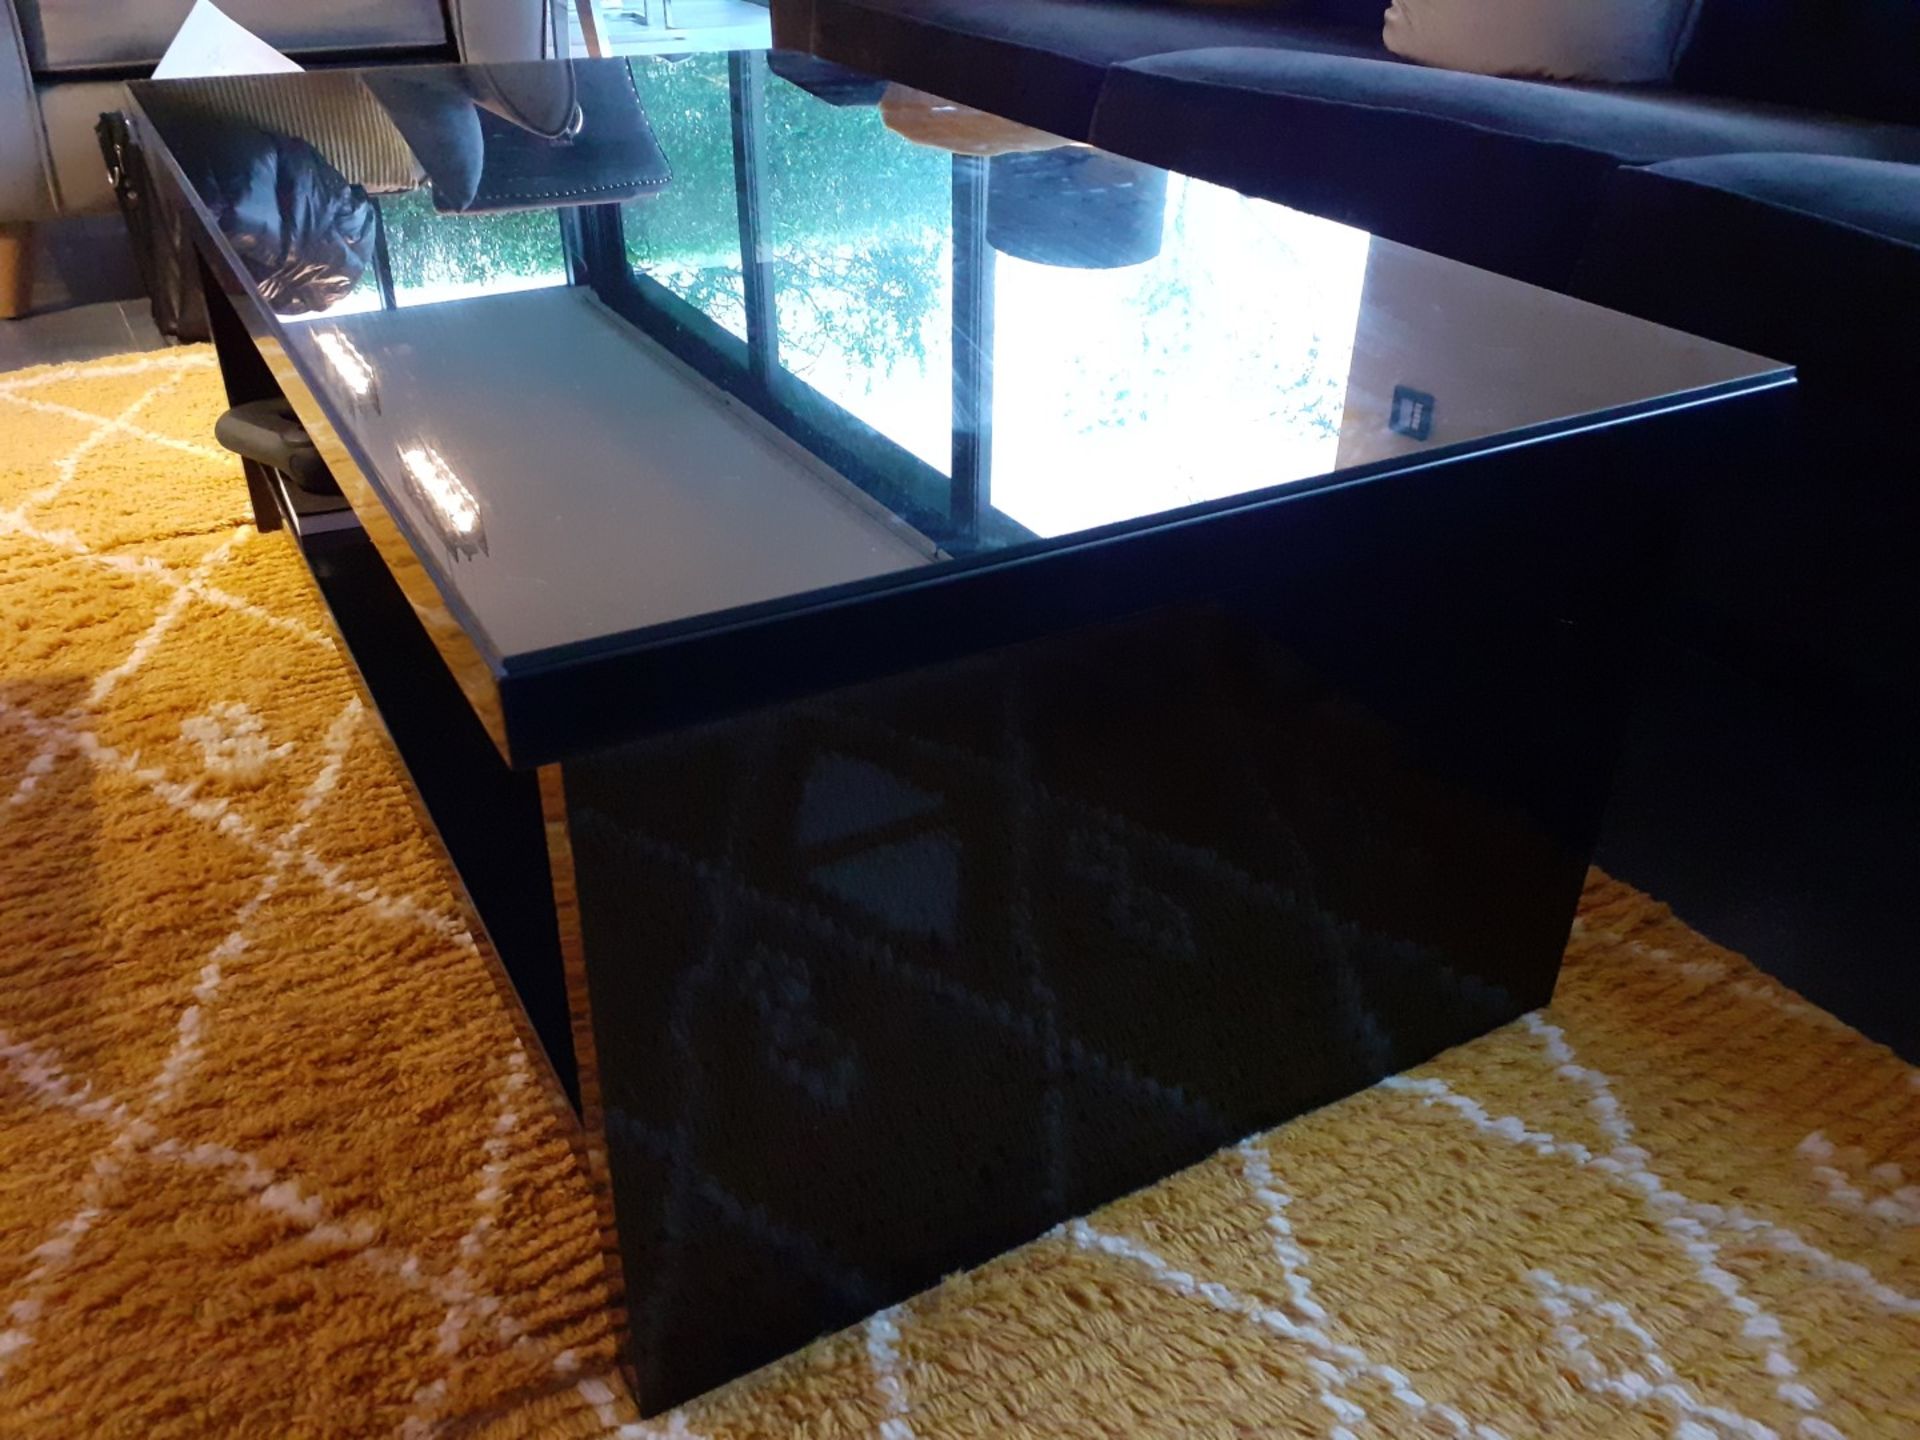 1 x Glass Topped Coffee Table With A Black Gloss Finish - Dimensions: 120 x 65 x H42cm - NO VAT - Image 3 of 5